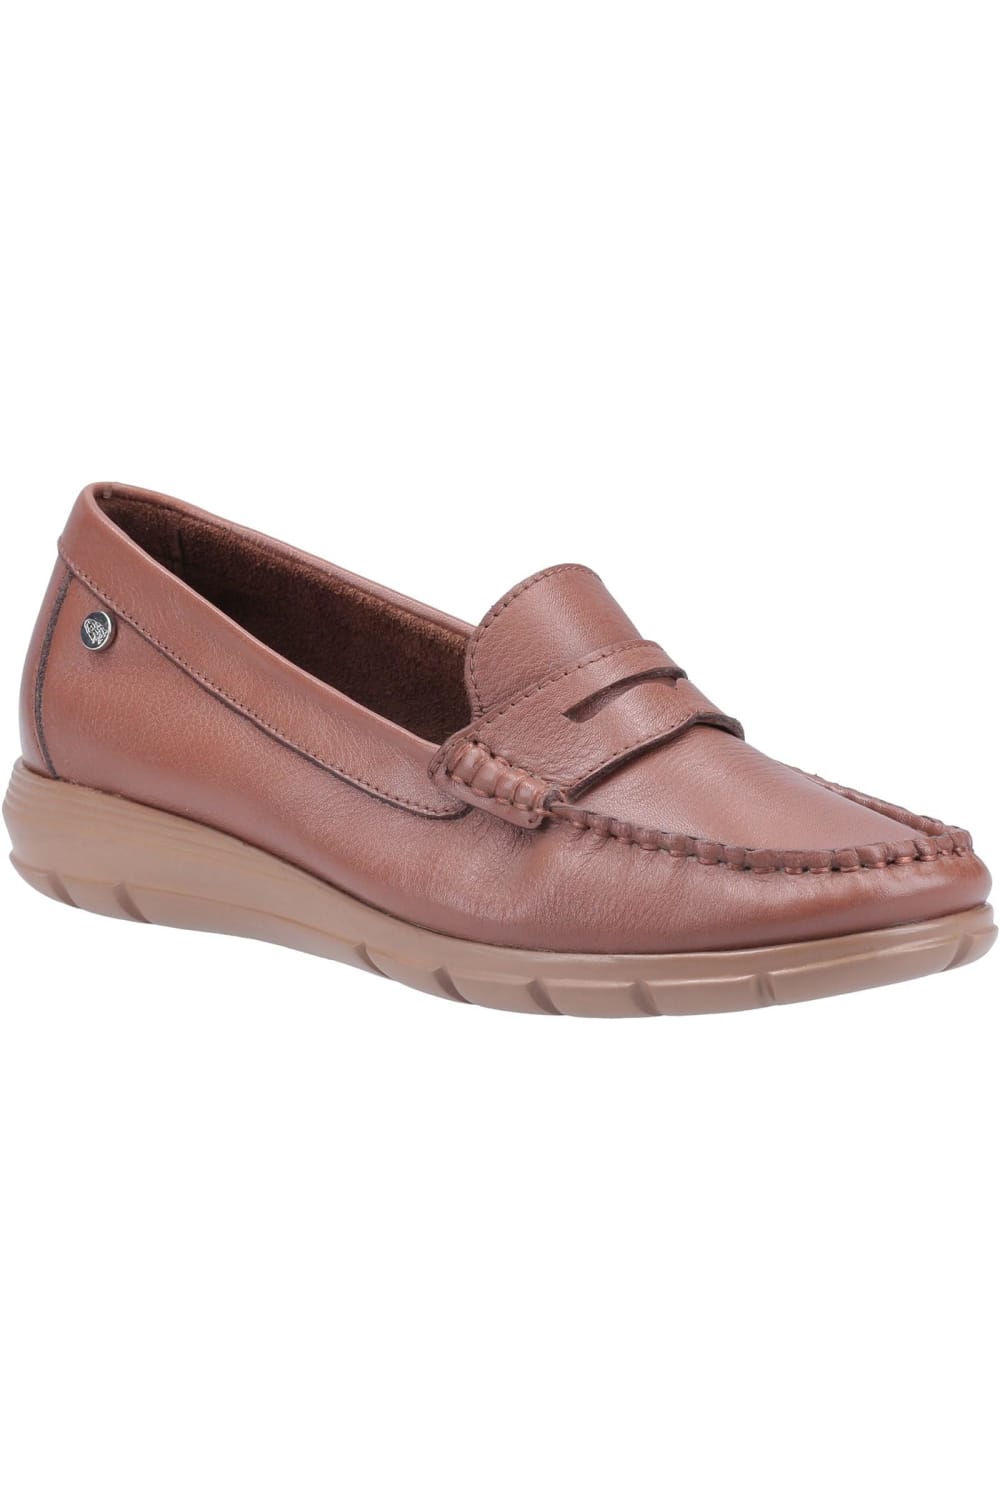 Womens/Ladies Paige Leather Loafer (Tan)